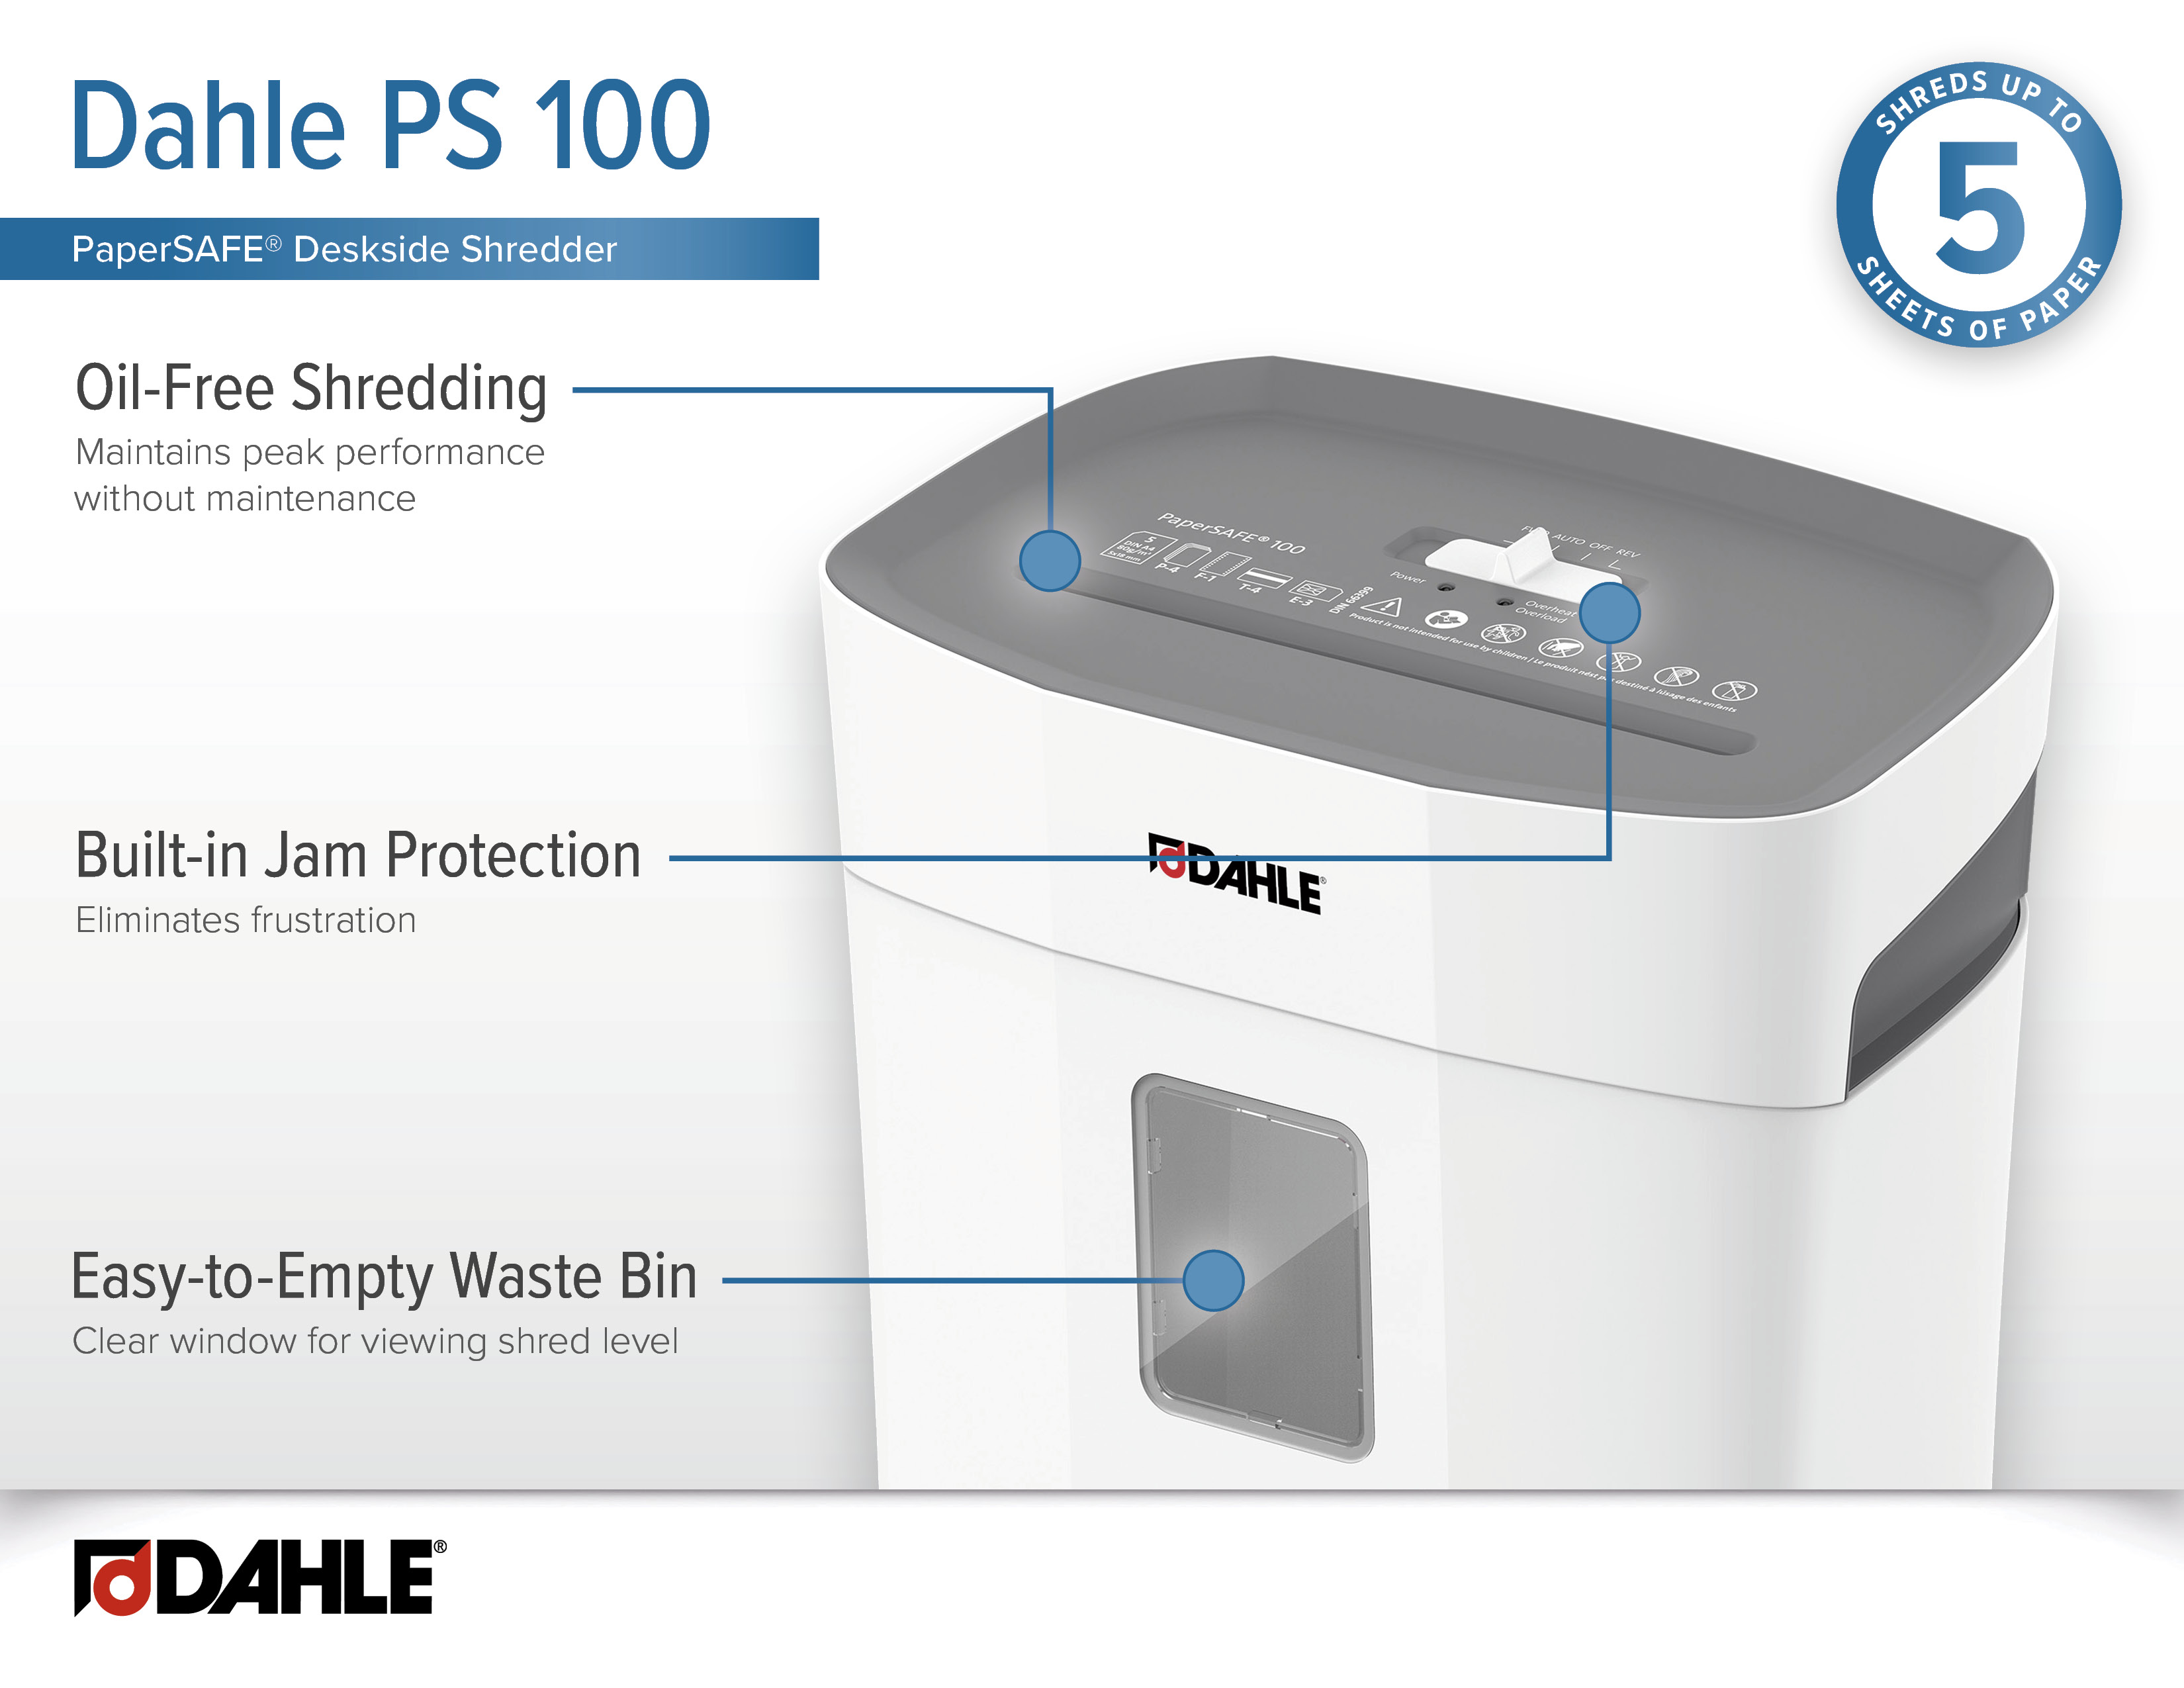 Dahle PaperSAFE 100 Infographic